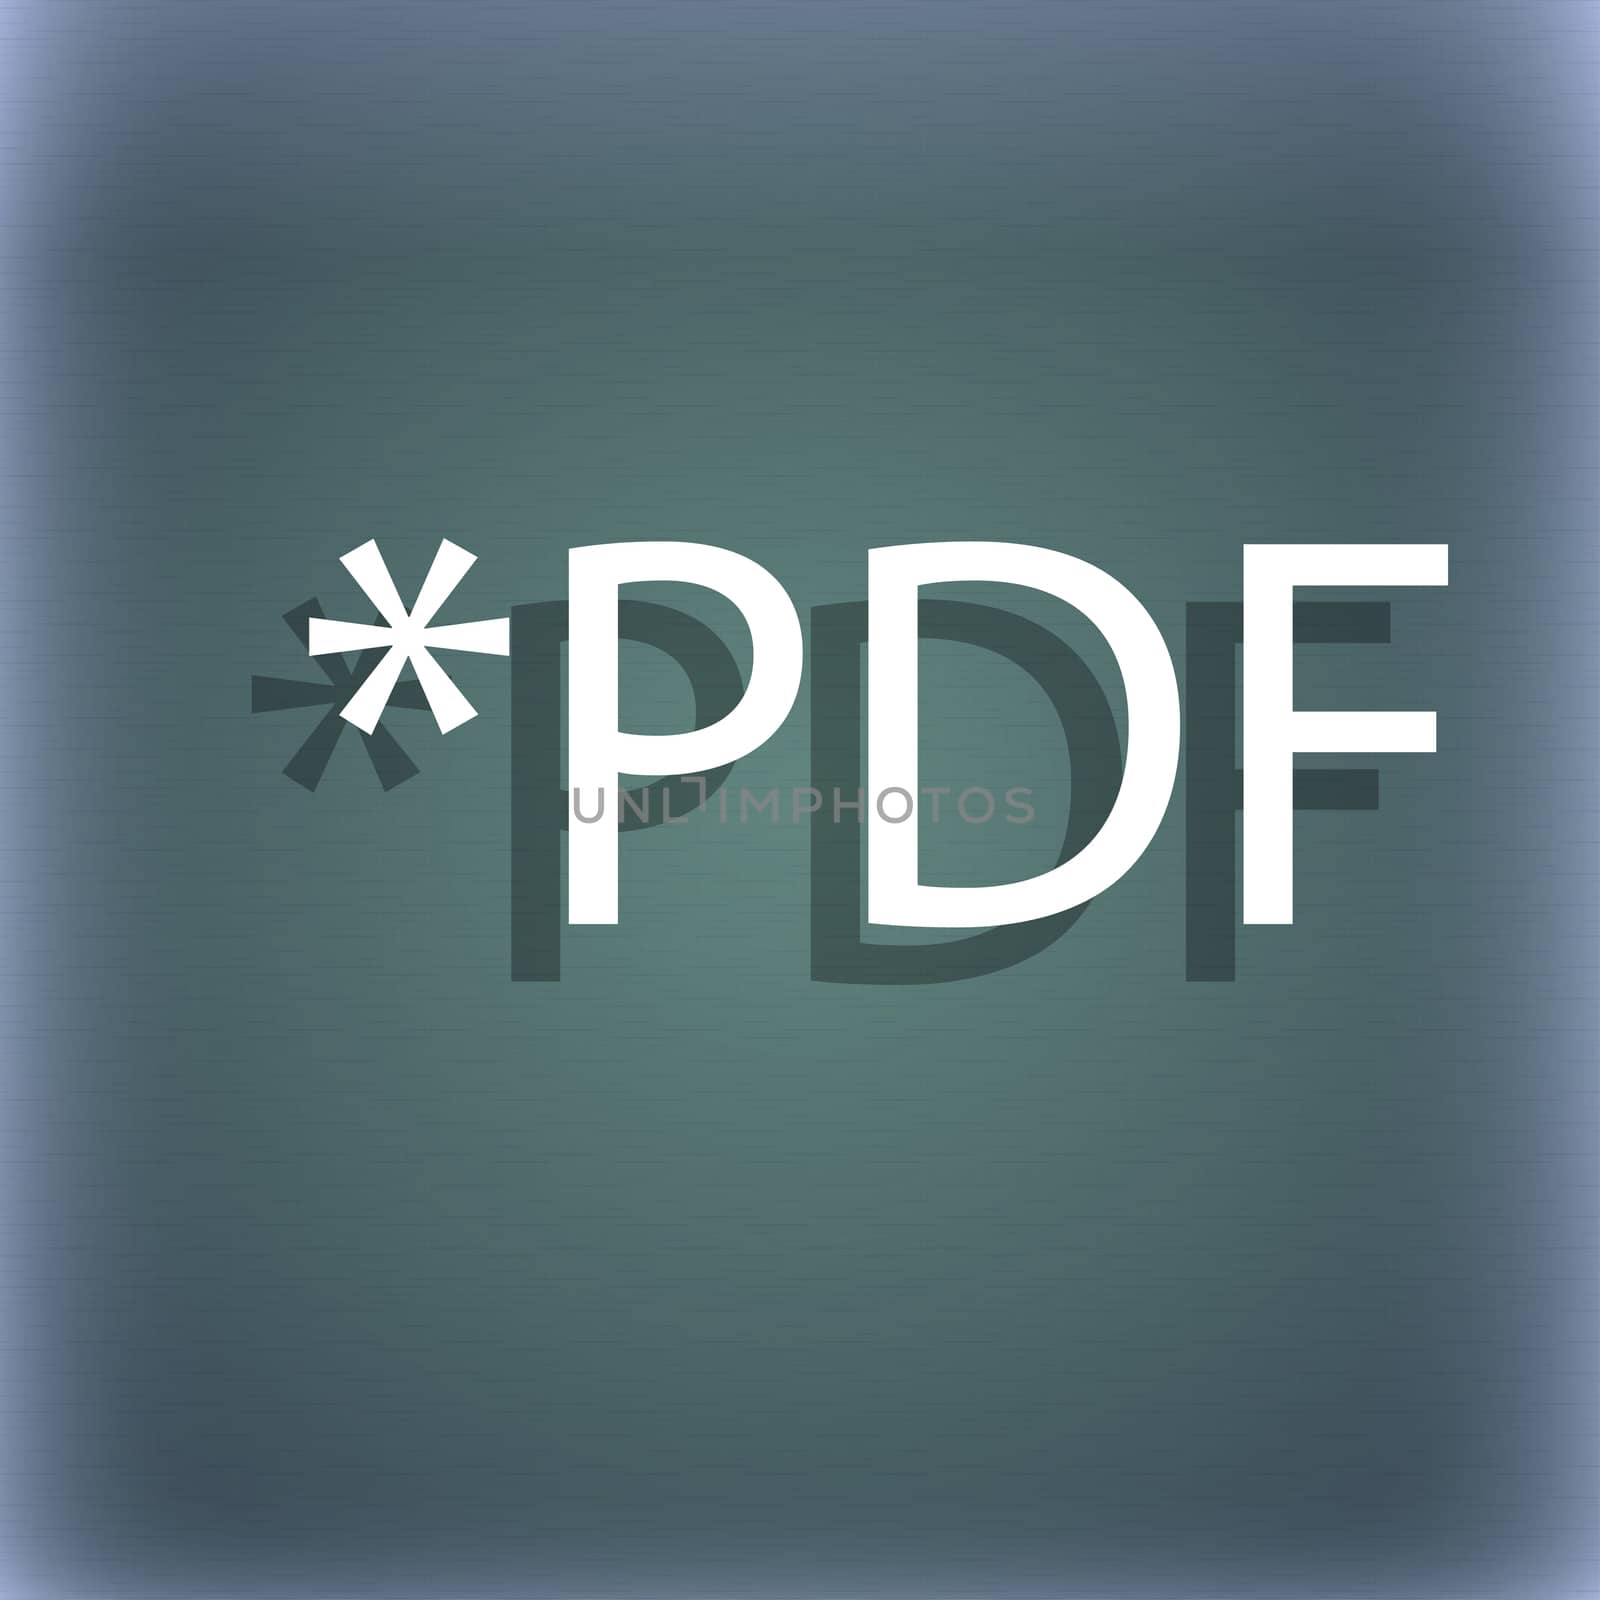 PDF file document icon. Download pdf button. PDF file extension symbol. On the blue-green abstract background with shadow and space for your text. illustration